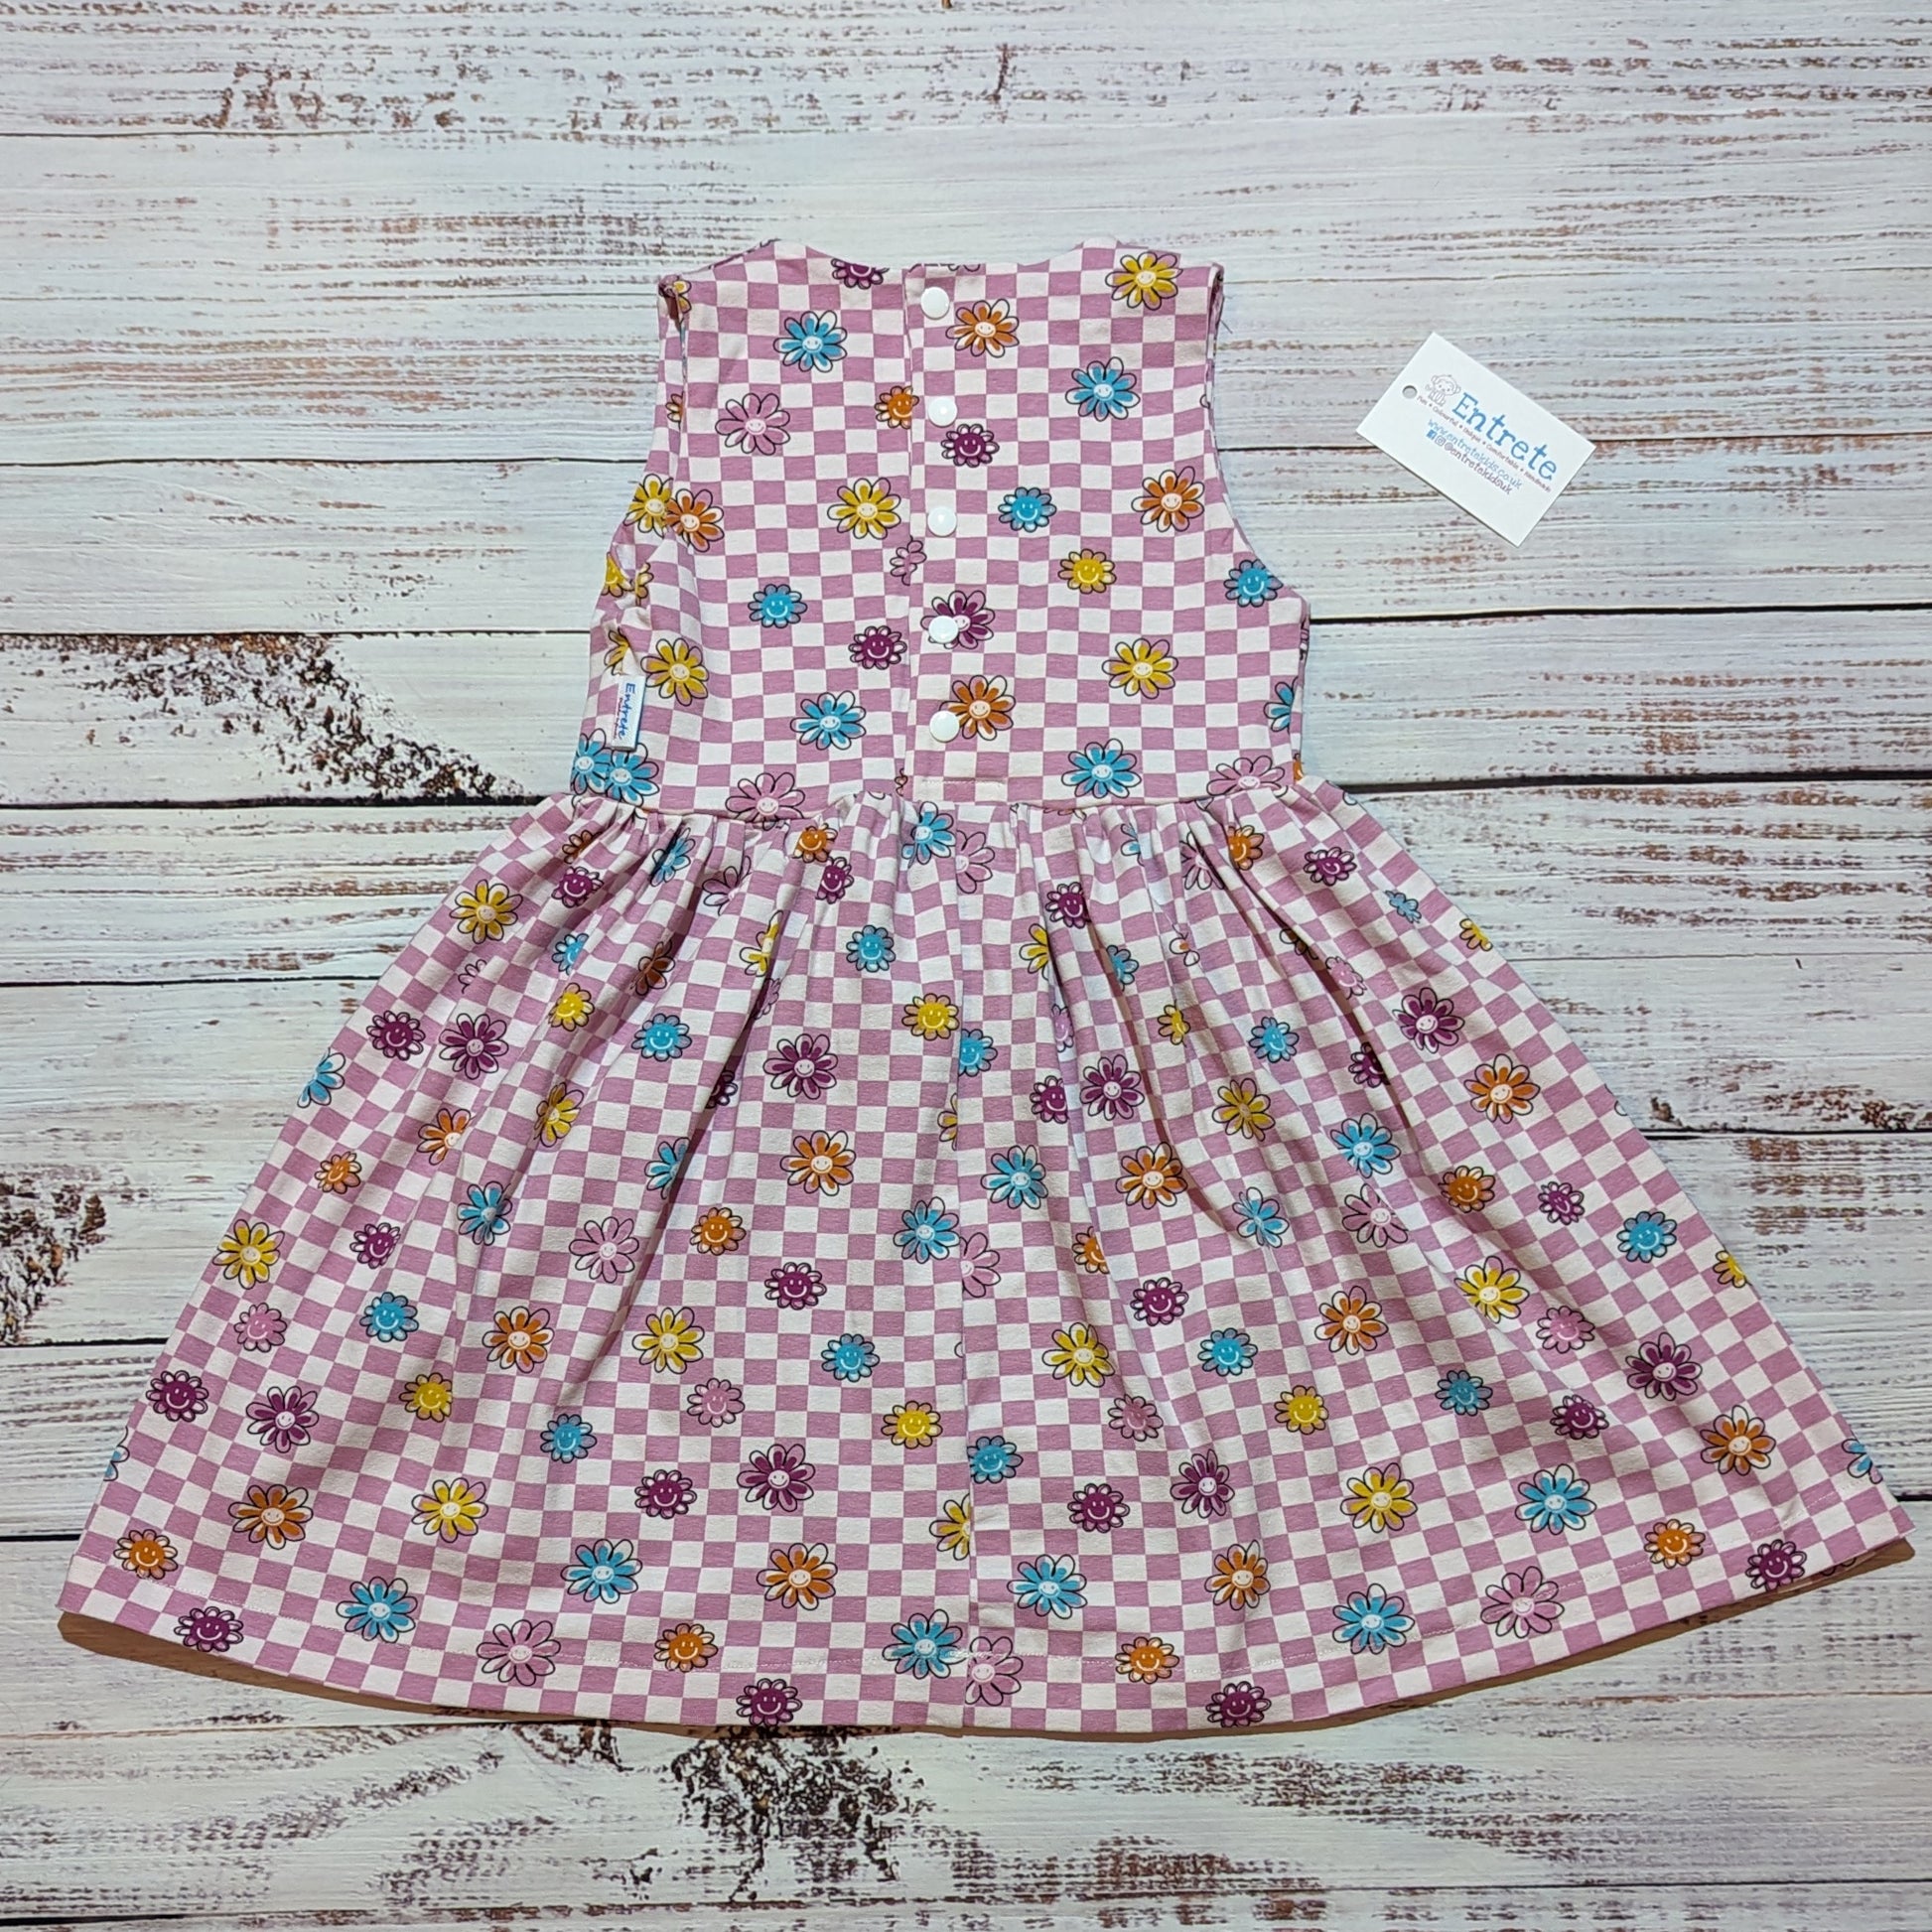 The adorable pink checked happy flowers dress. handmade in soft and comfy cotton jersey with a smiling flowers print. Shown from the rear.